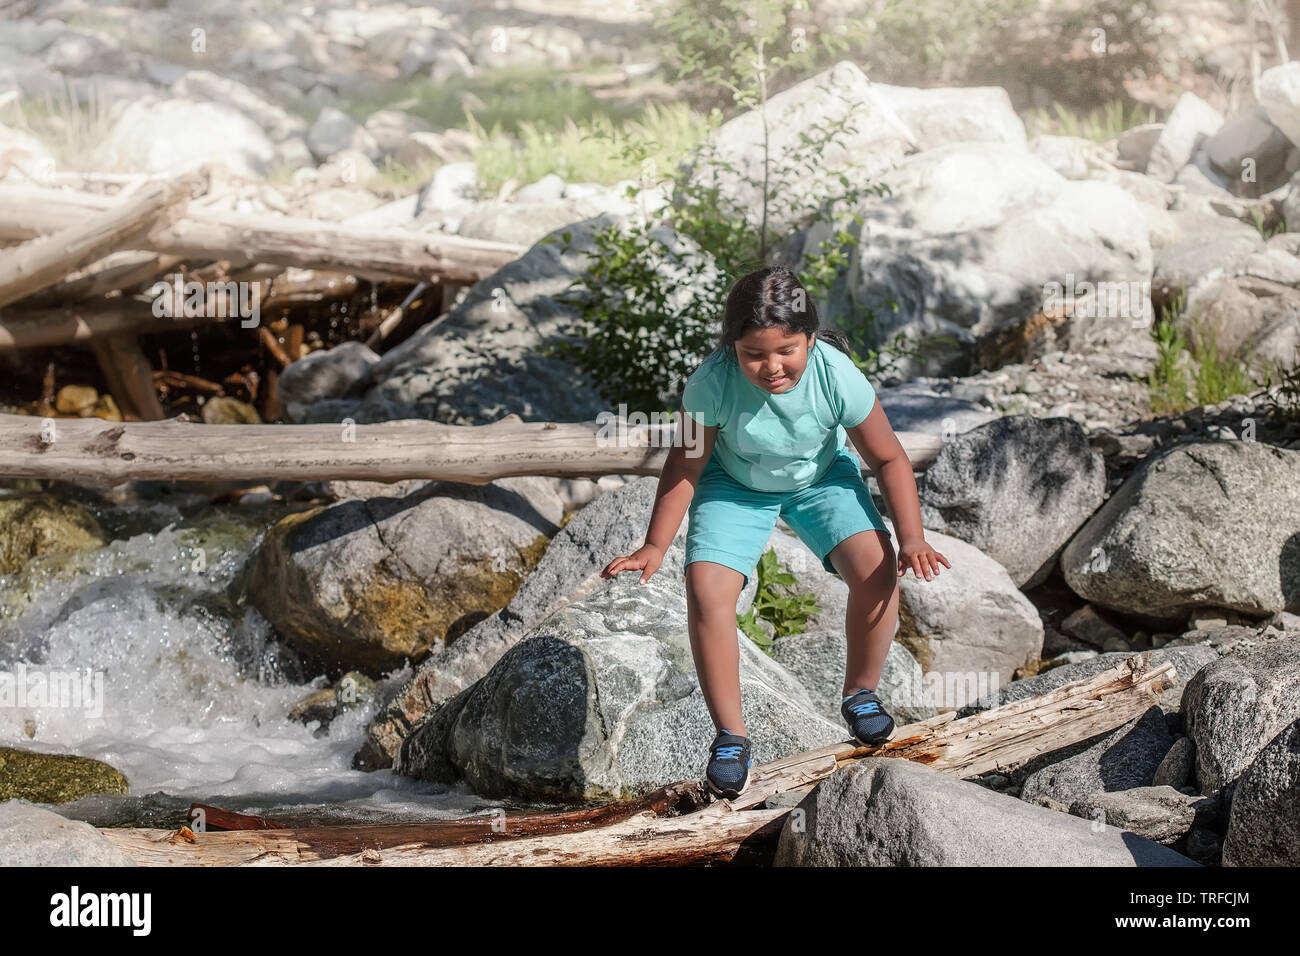 A little girl crossing a wooden log over river rapids during summer camp, weight loss activity for children. Stock Photo